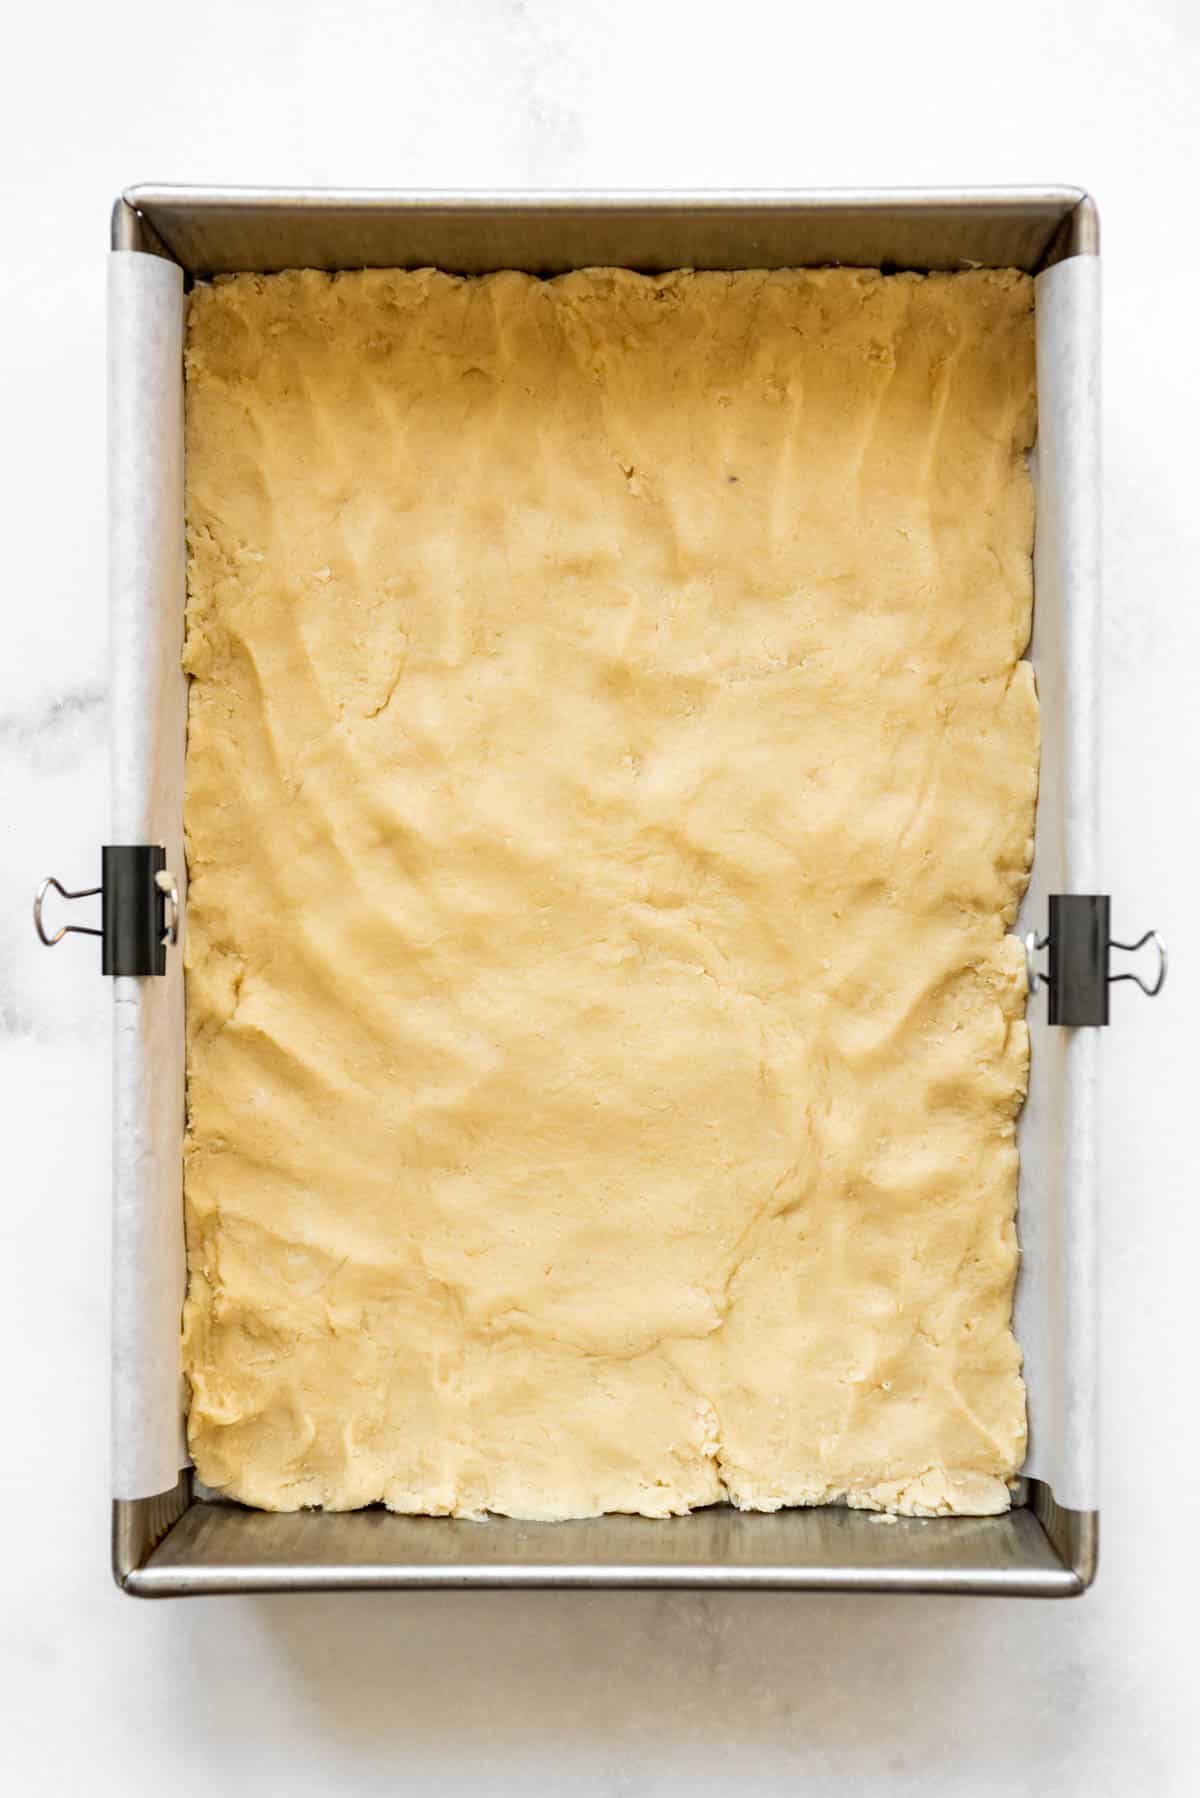 Pressing a shortbread crust into the bottom of a 9x13-inch baking dish.